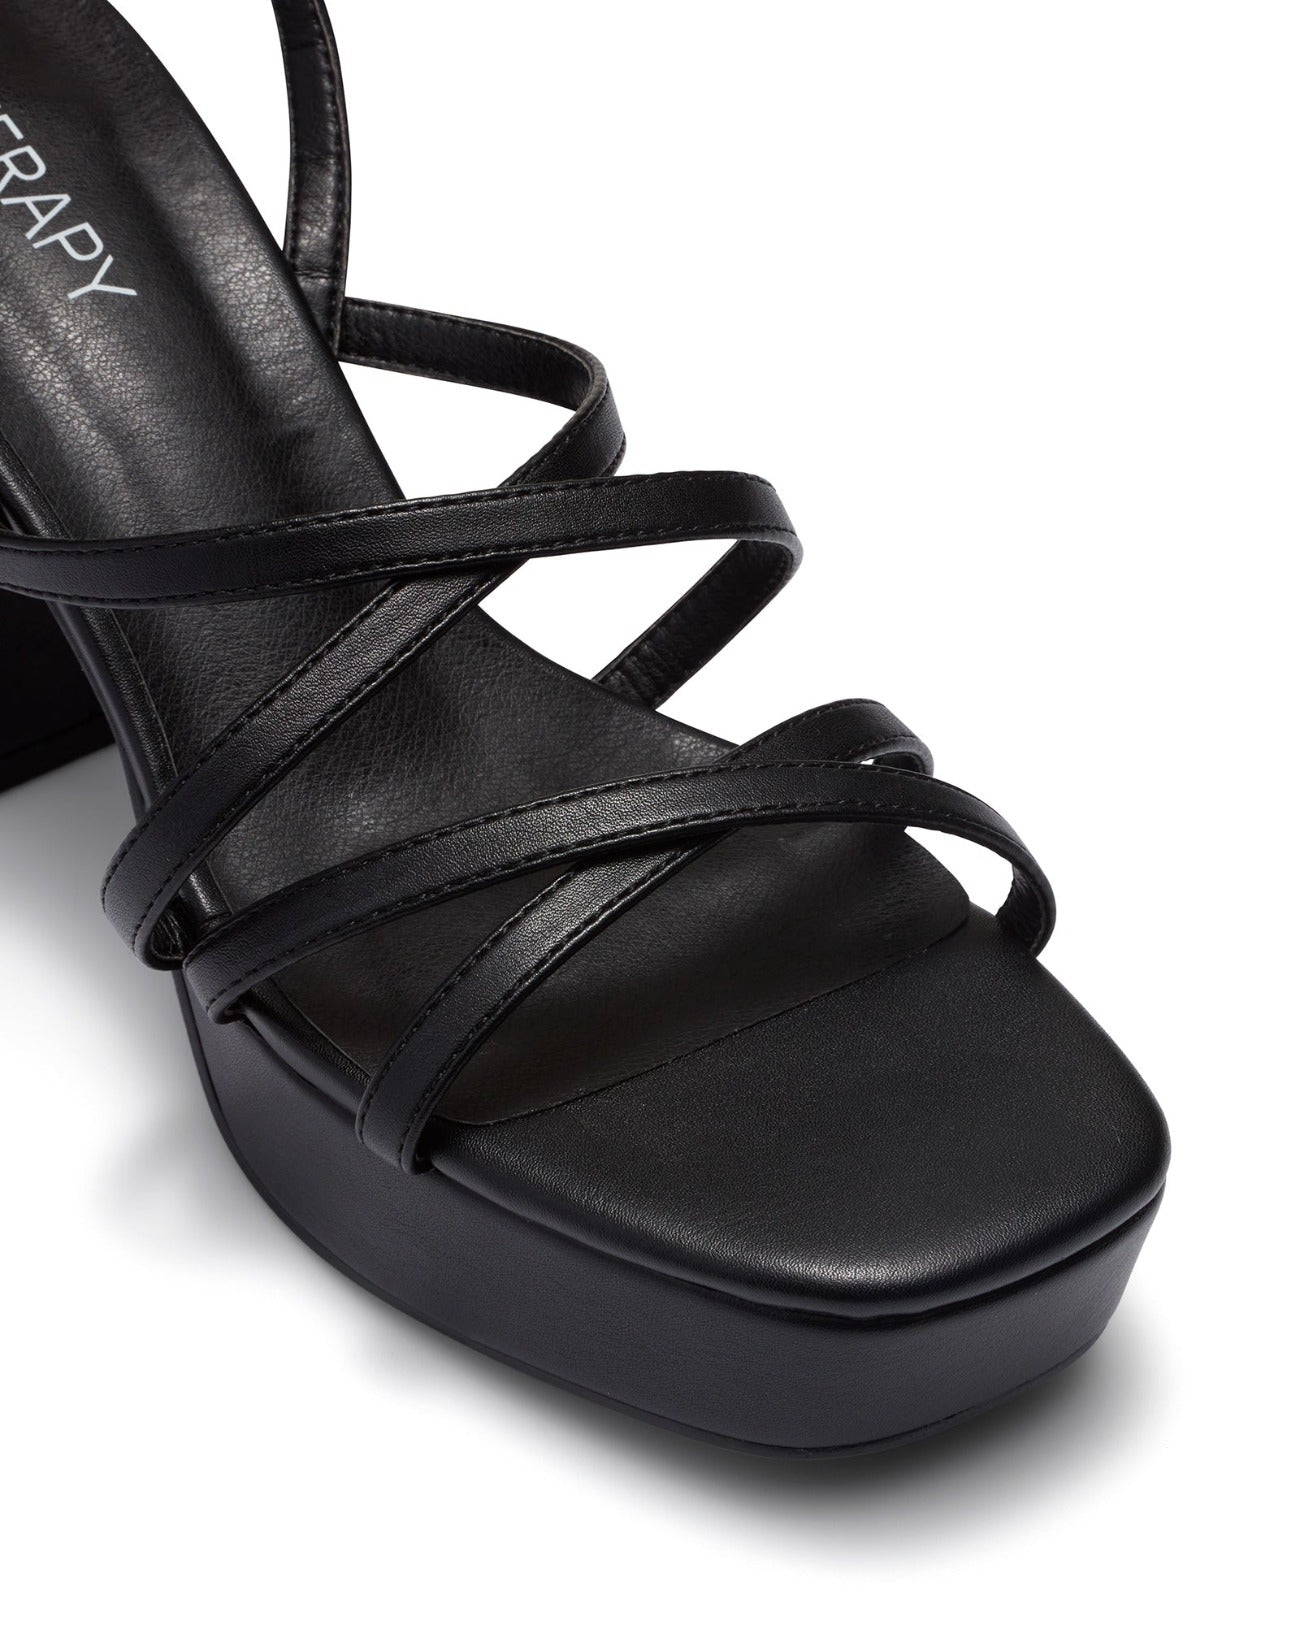 Therapy Shoes Ada Black | Women's Heels | Sandals | Platform | Strappy